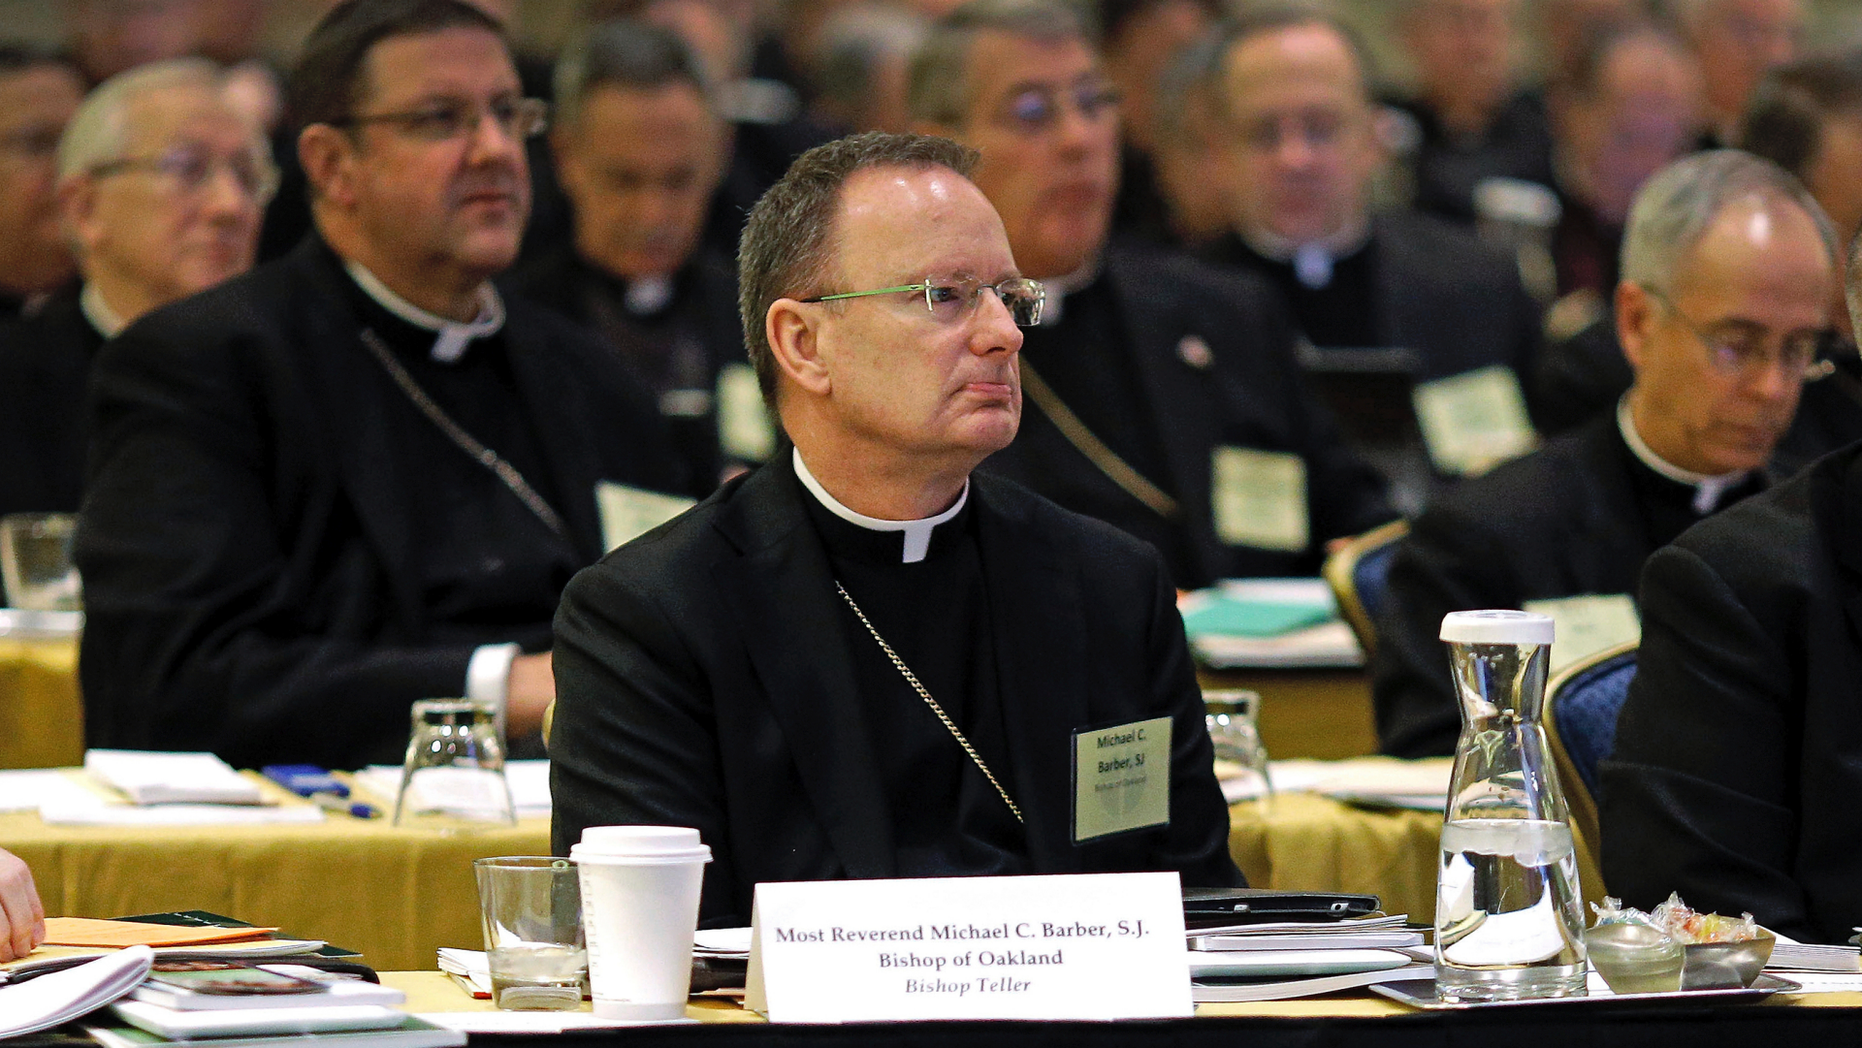 DOSSIER - In the archival photo of 12 November 2013, the Roman Catholic Diocese of Oakland, Bishop Michael Barber, Bishop at the center, listens to a presentation alongside other bishops at the meeting. 39th Autumn of the United States Conference of Catholic Bishops in Baltimore. The Catholic Diocese of Oakland, California, has published the names of 45 priests, deacons and religious brothers who, according to the authorities, are 